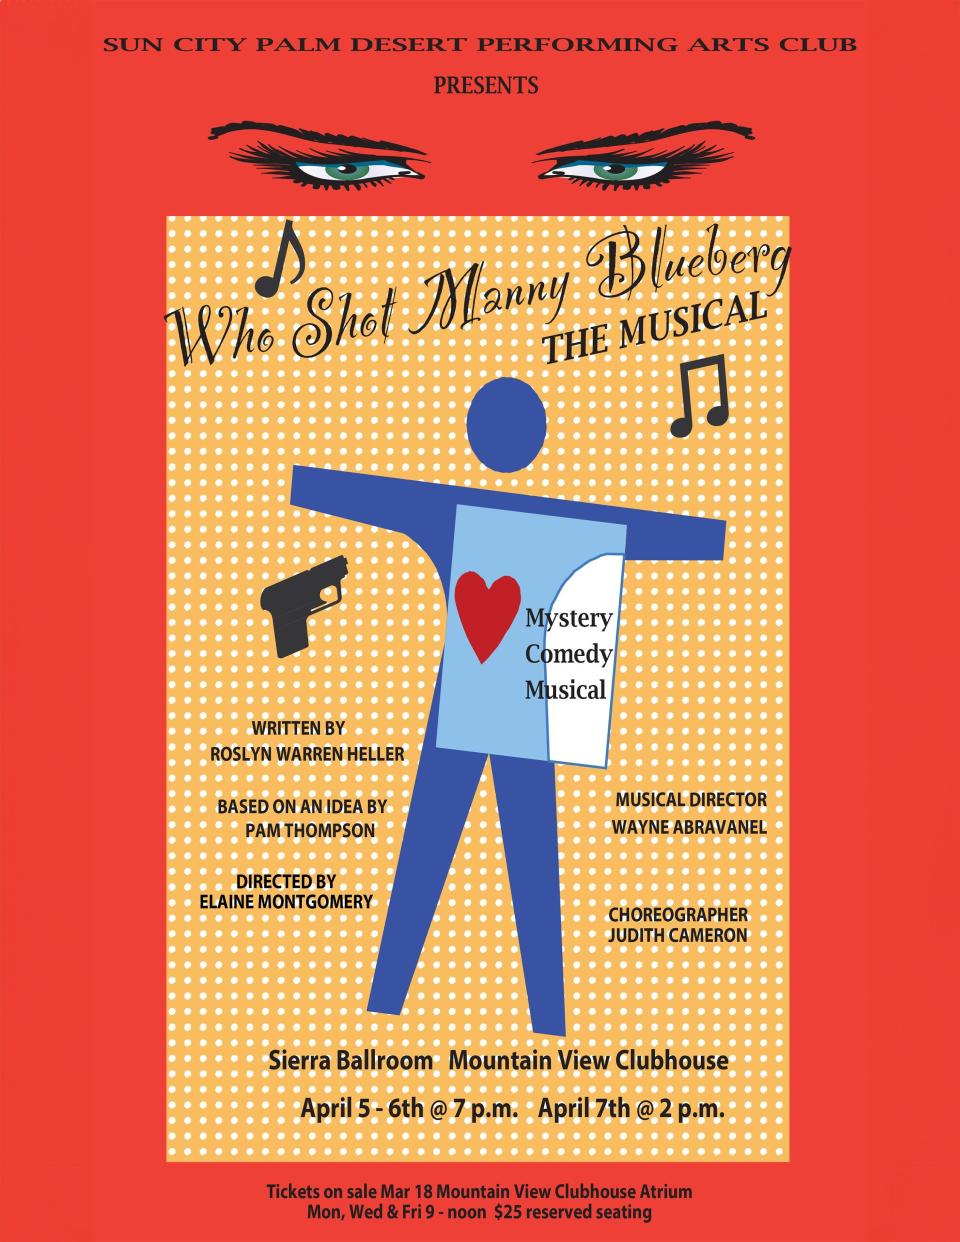 The Sun City Performing Arts Club presents "Who Shot Manny Blueberg" April 5-7 at Sun City's Mountain View Clubhouse in Palm Desert, Calif.